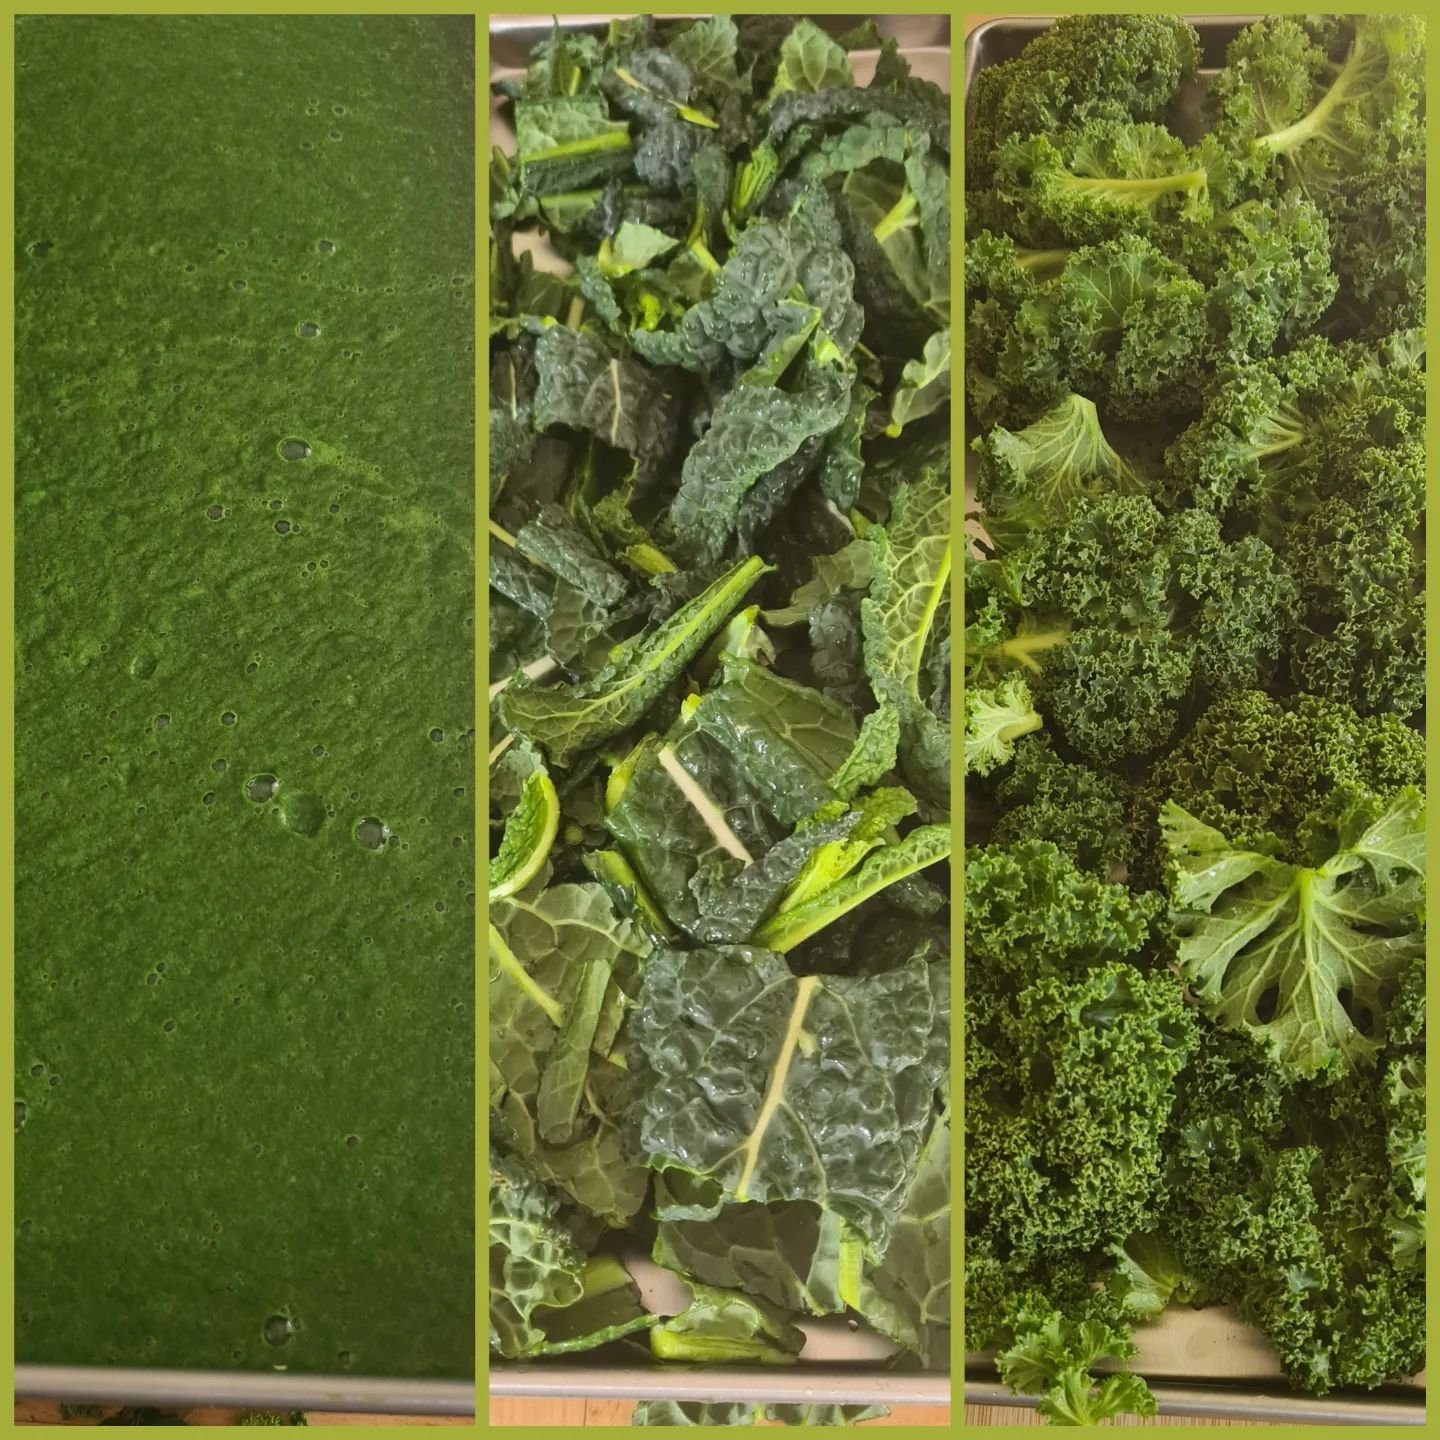 As the growing seasons come to a close, a #harvestrightfreezedryer is the perfect way to preserve your veg. Ensuring you have tasty nutritional food all winter long. 

We have preserved curly and Nero kale in complete leaf form with a tray of blended